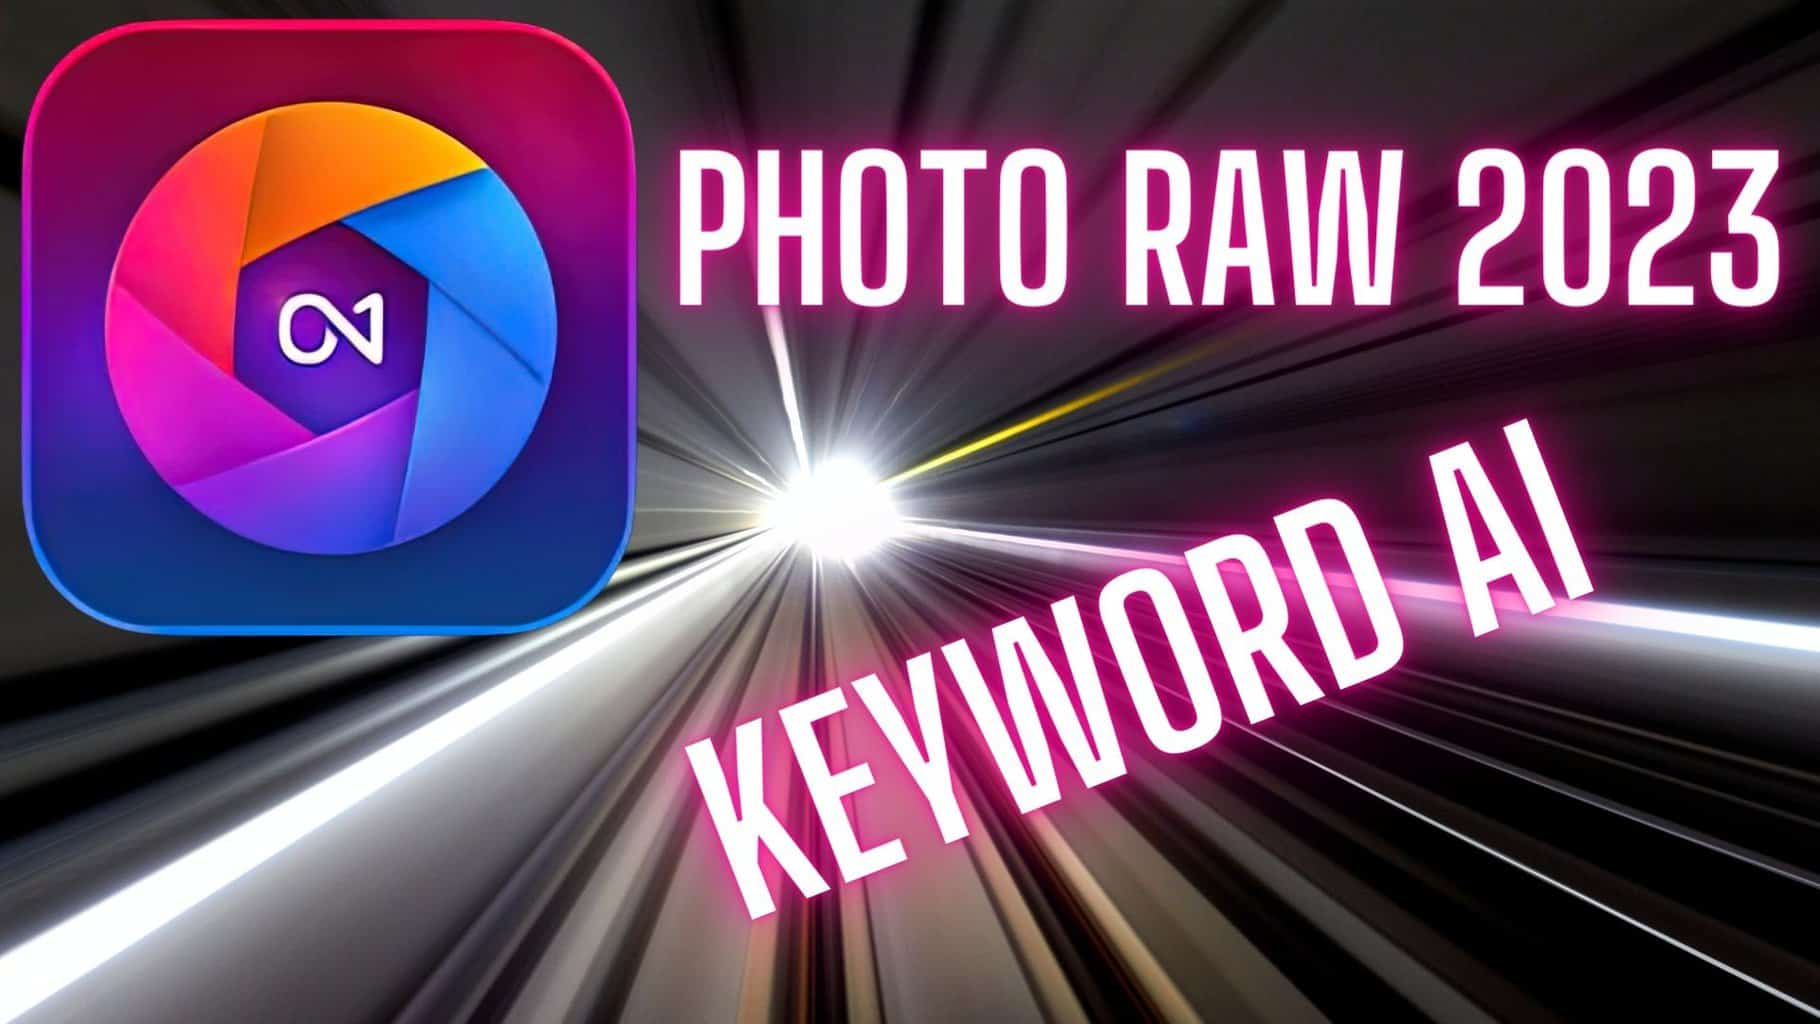 ON1 Photo Review 2023 Keyword AI Review